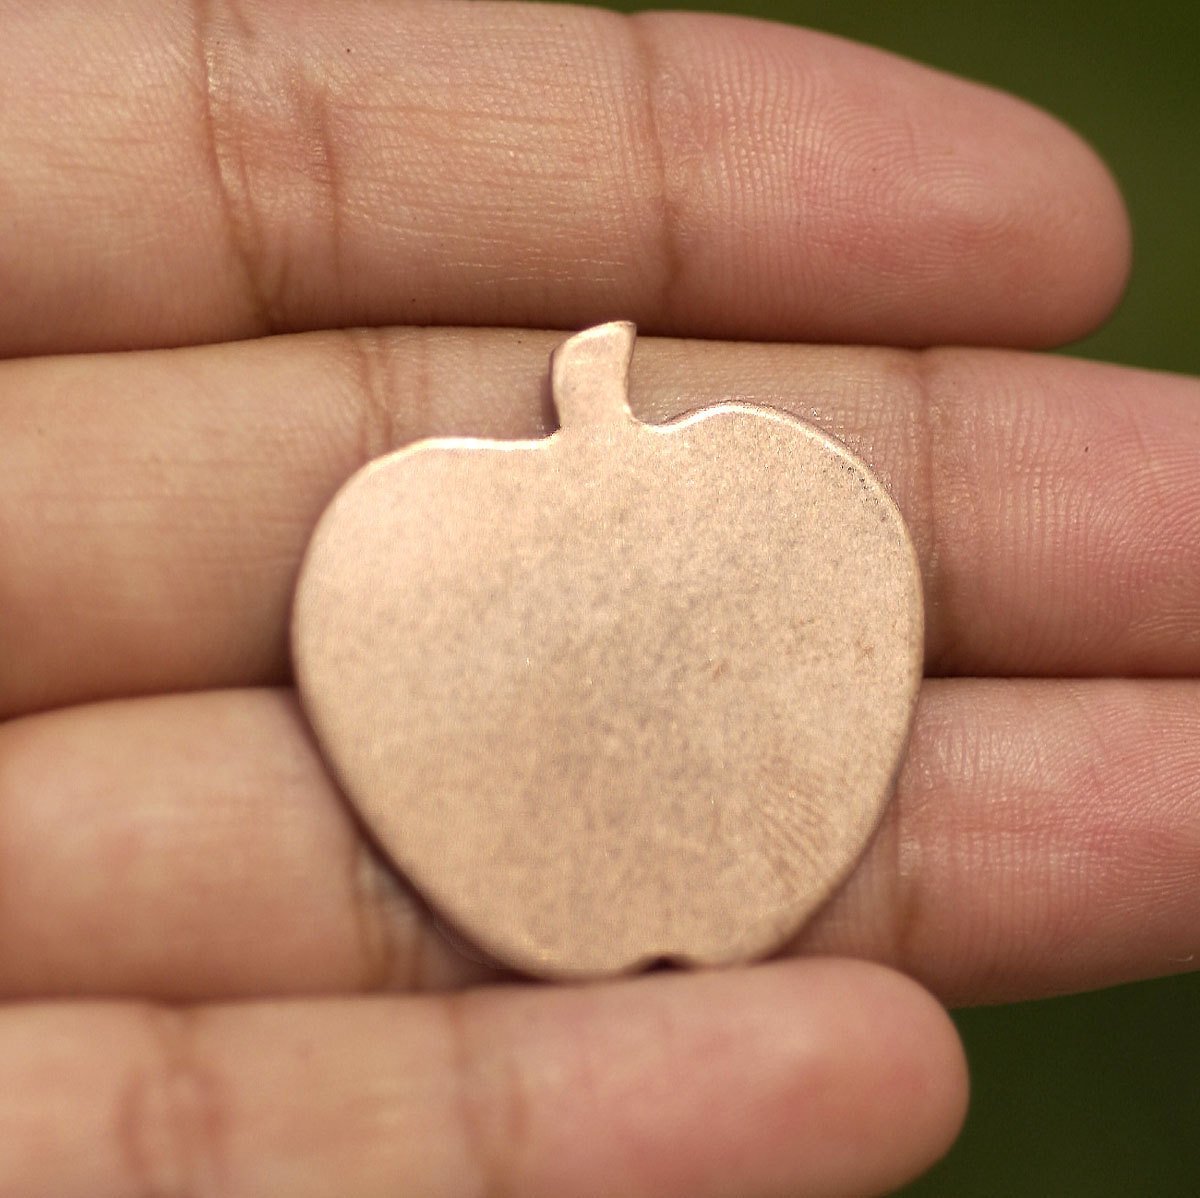 Large Apples with Stem 28mm x 30mm Shape Blank for Enameling Stamping Texturing Jewelry Making Blanks Variety of Metals